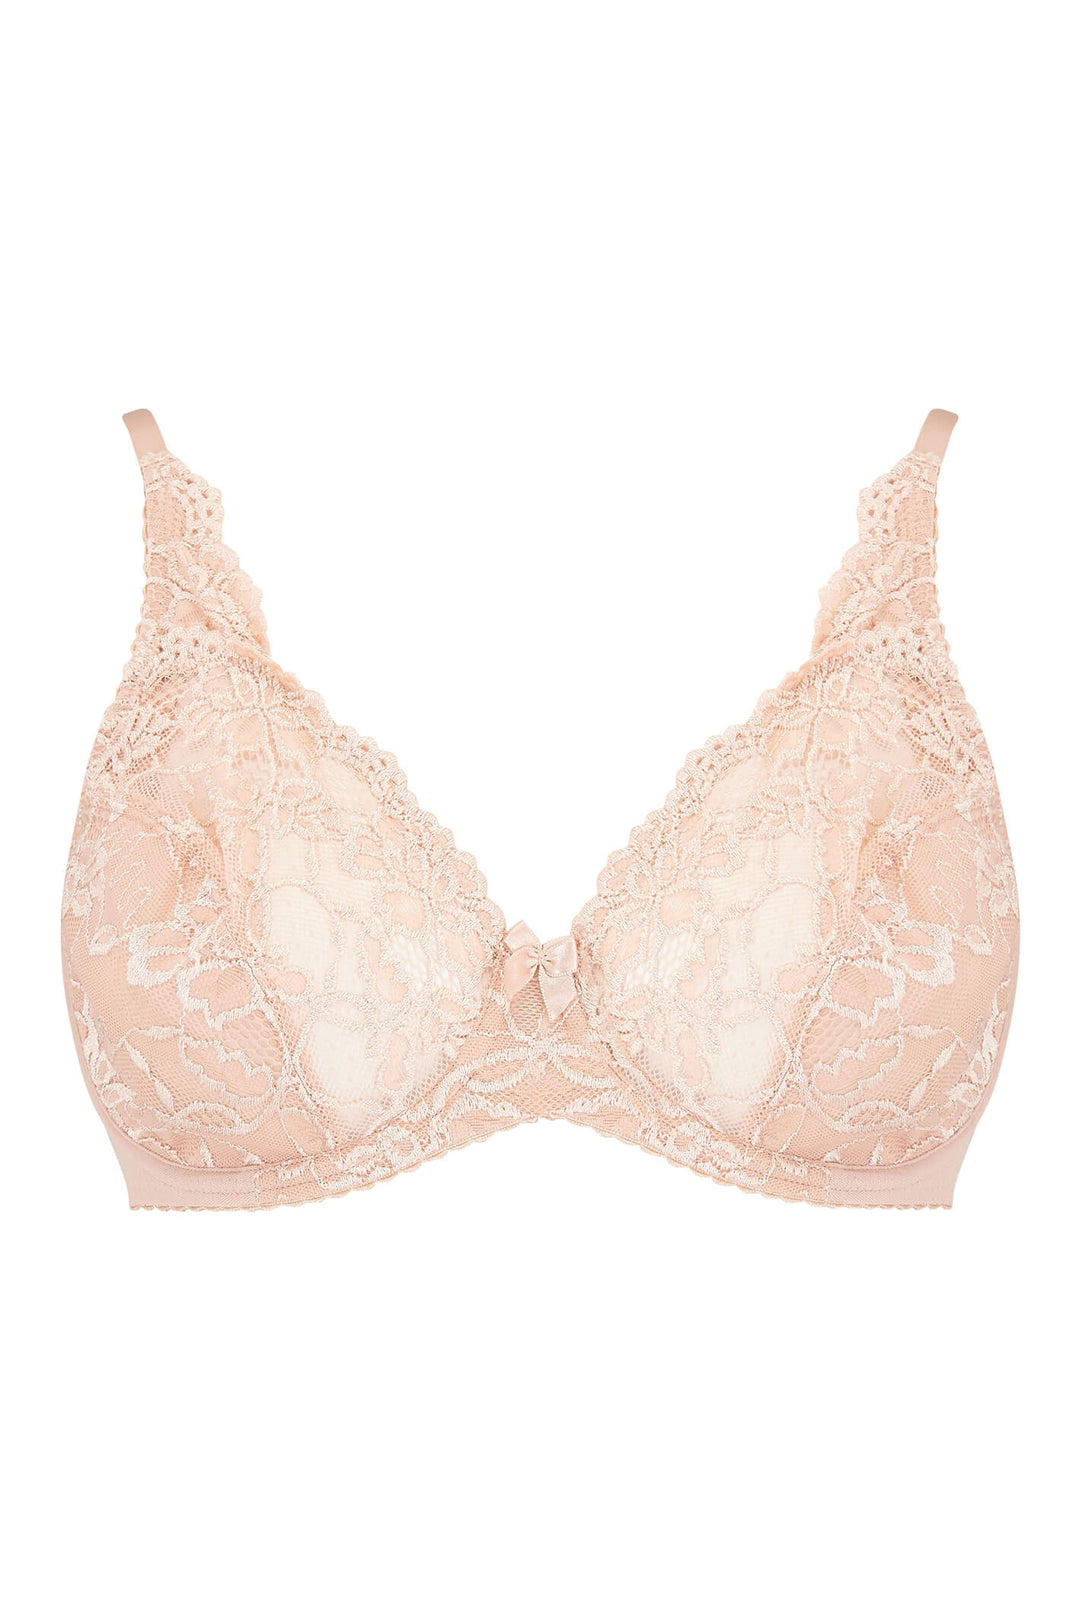 Charnos 116501 Rosalind Full Cup Underwired Brulee Bra - Shirley Allum Boutique